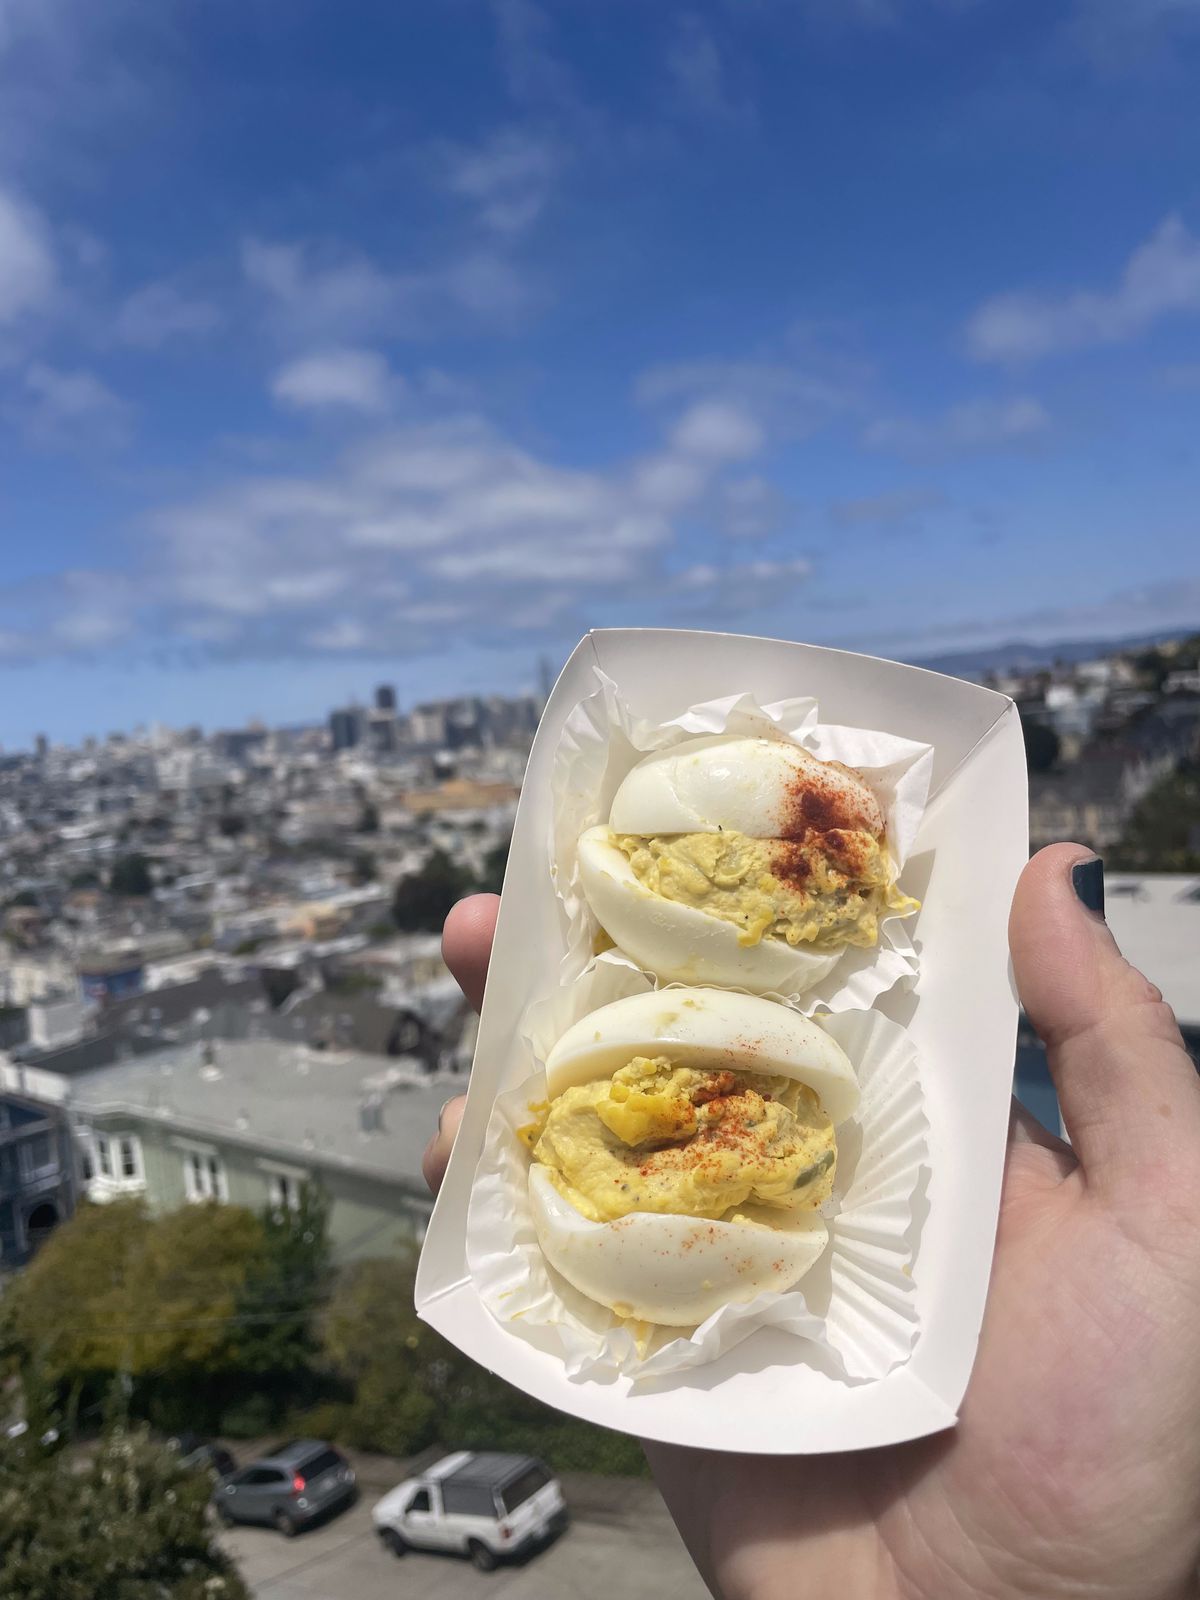 Two deviled eggs in a paper tray are seen against a city background.